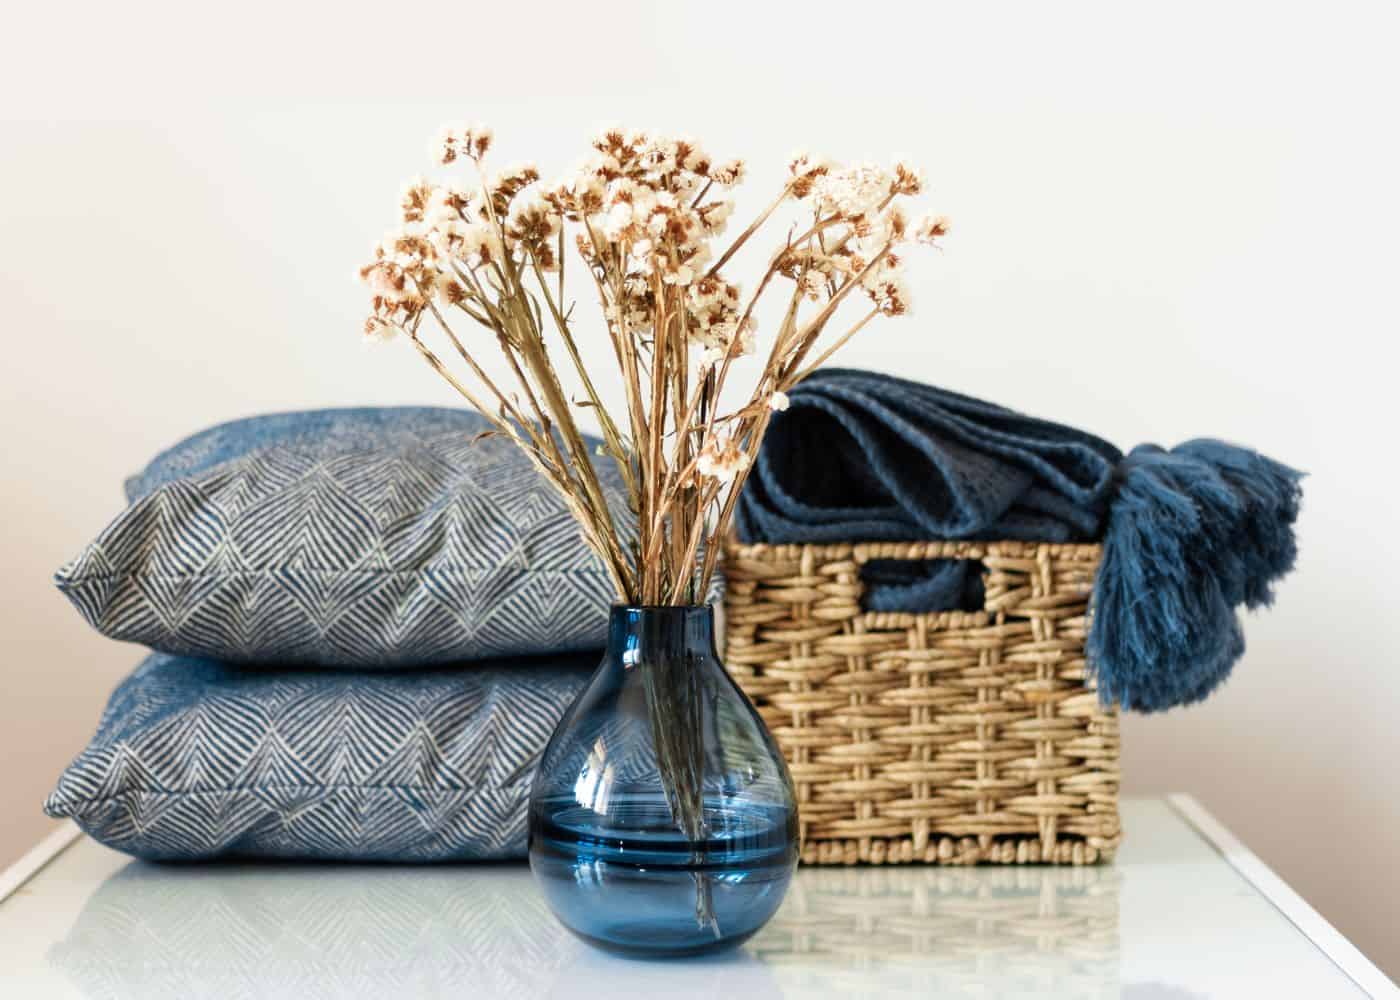 Organizing with baskets